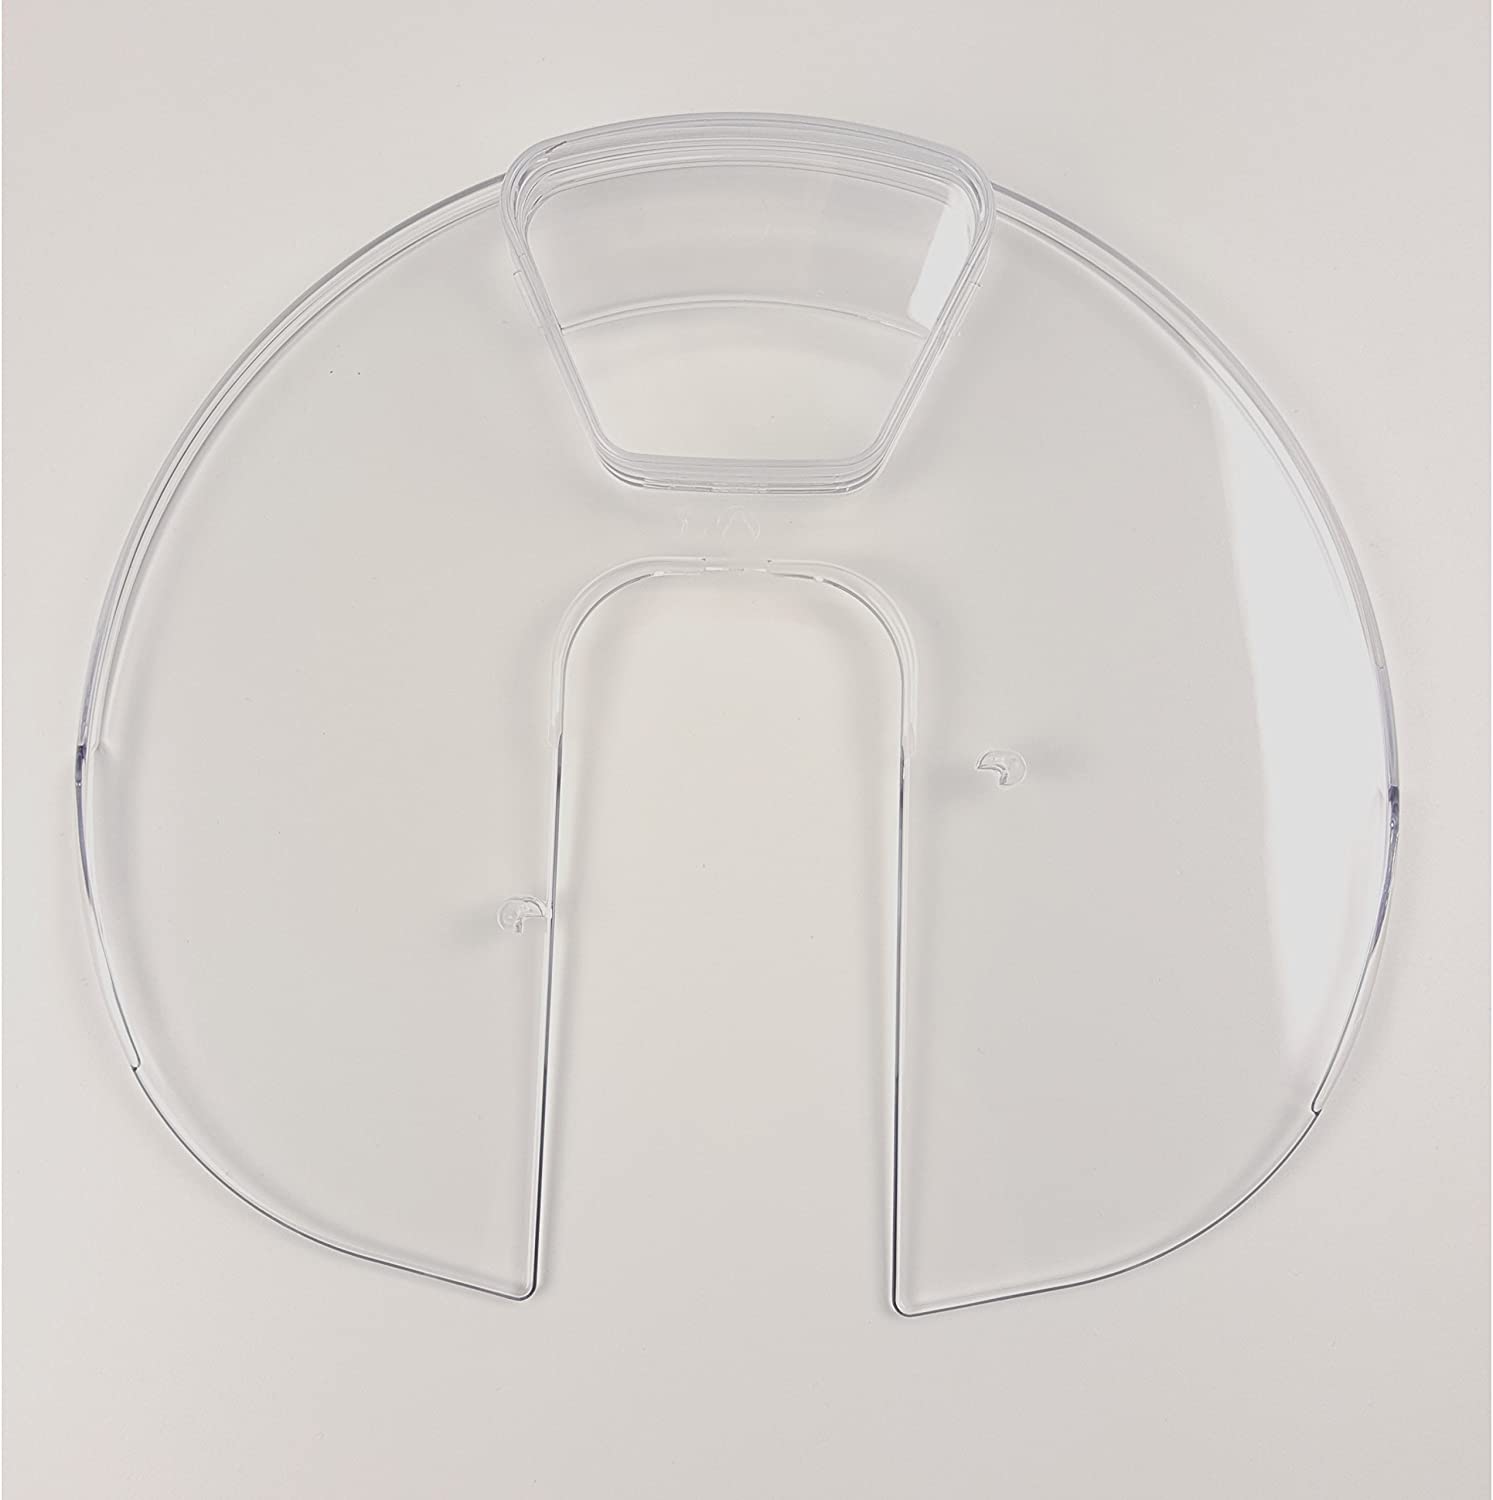 Bosch Mixing Bowl Cover Splash Guard Clear for Small Food Processor